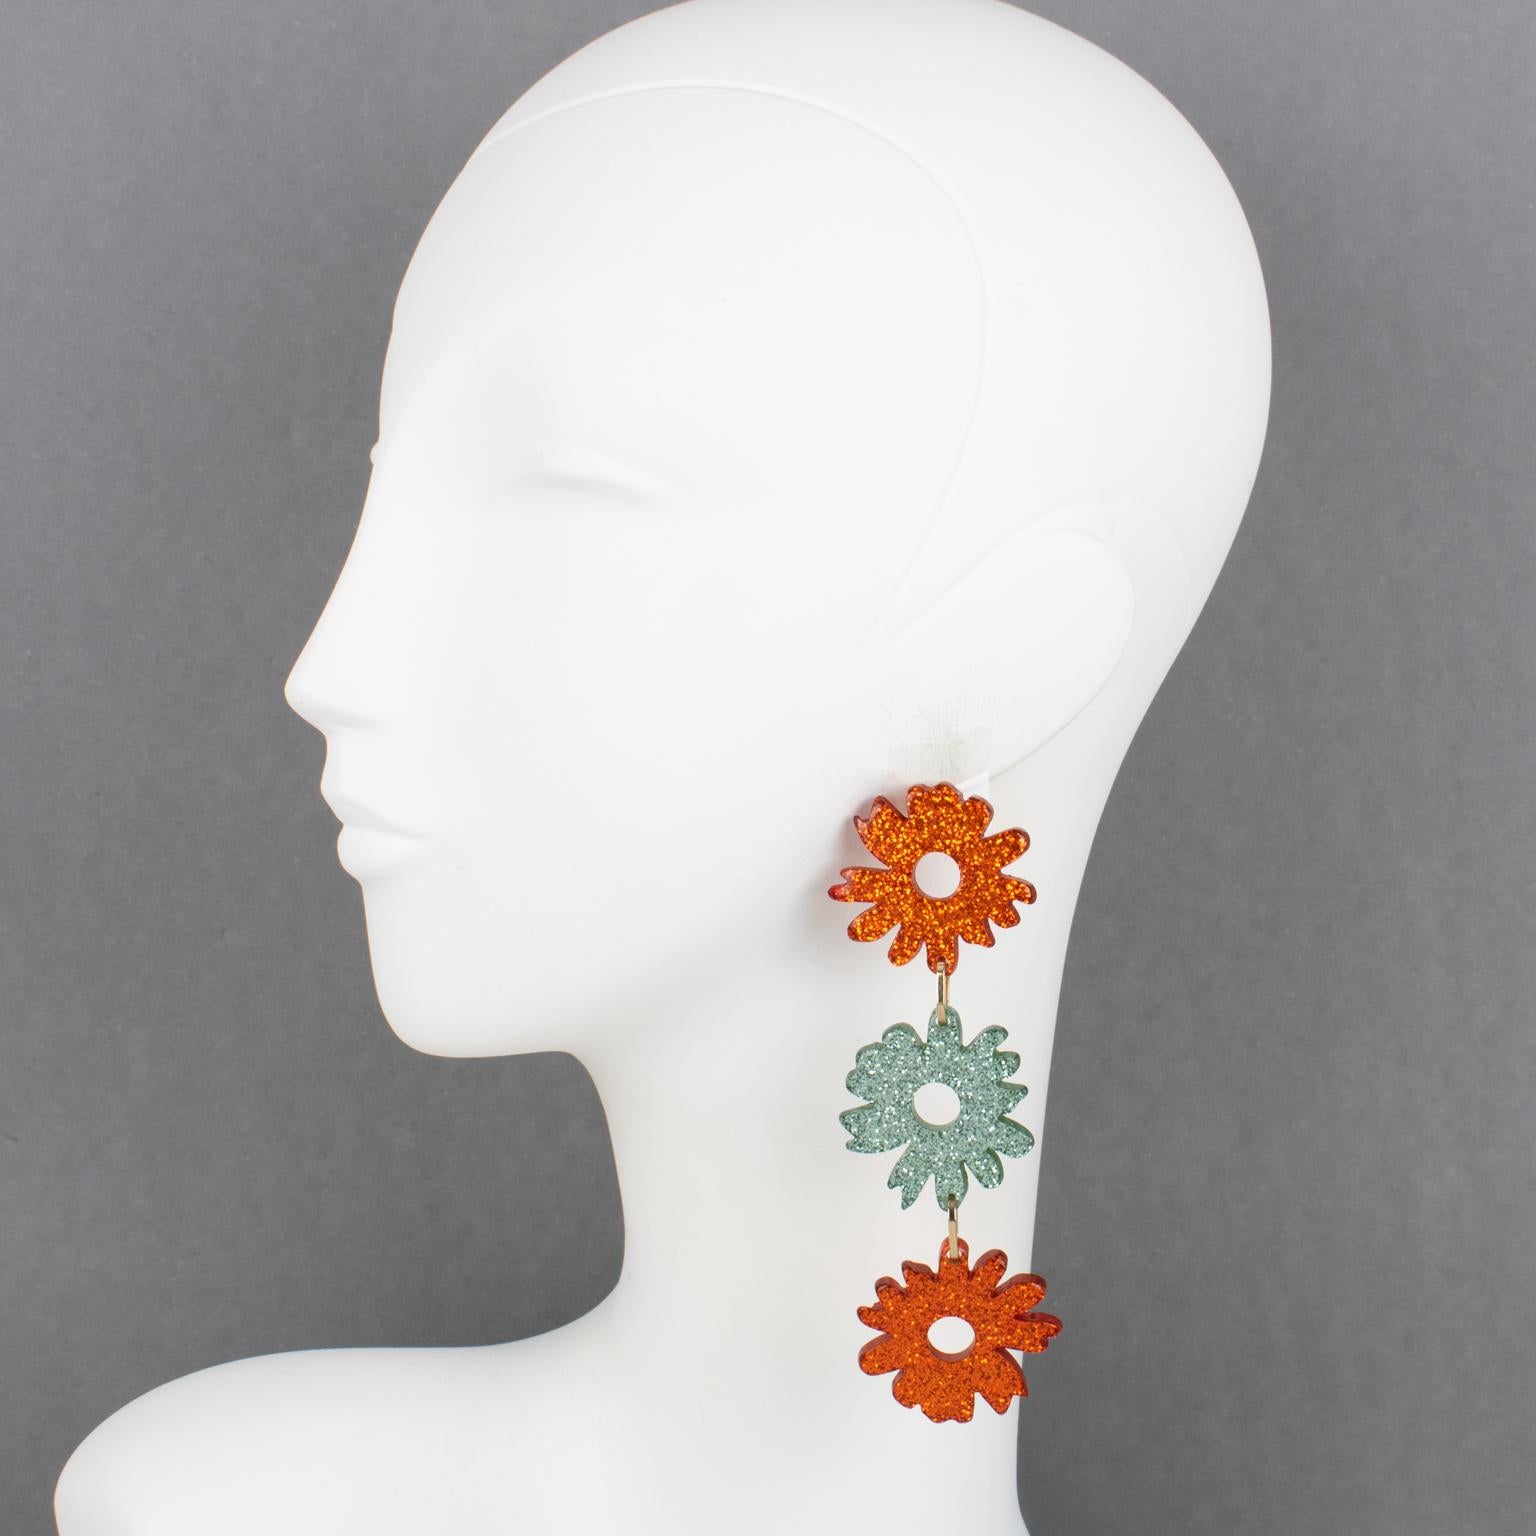 Missoni, Italy, designed these stunning oversized Lucite or resin earrings for pierced ears. The pieces feature a dangling drop shape with carved daisy flowers in an asymmetric color pattern scheme. The pieces boast burnt orange and sky blue-gray